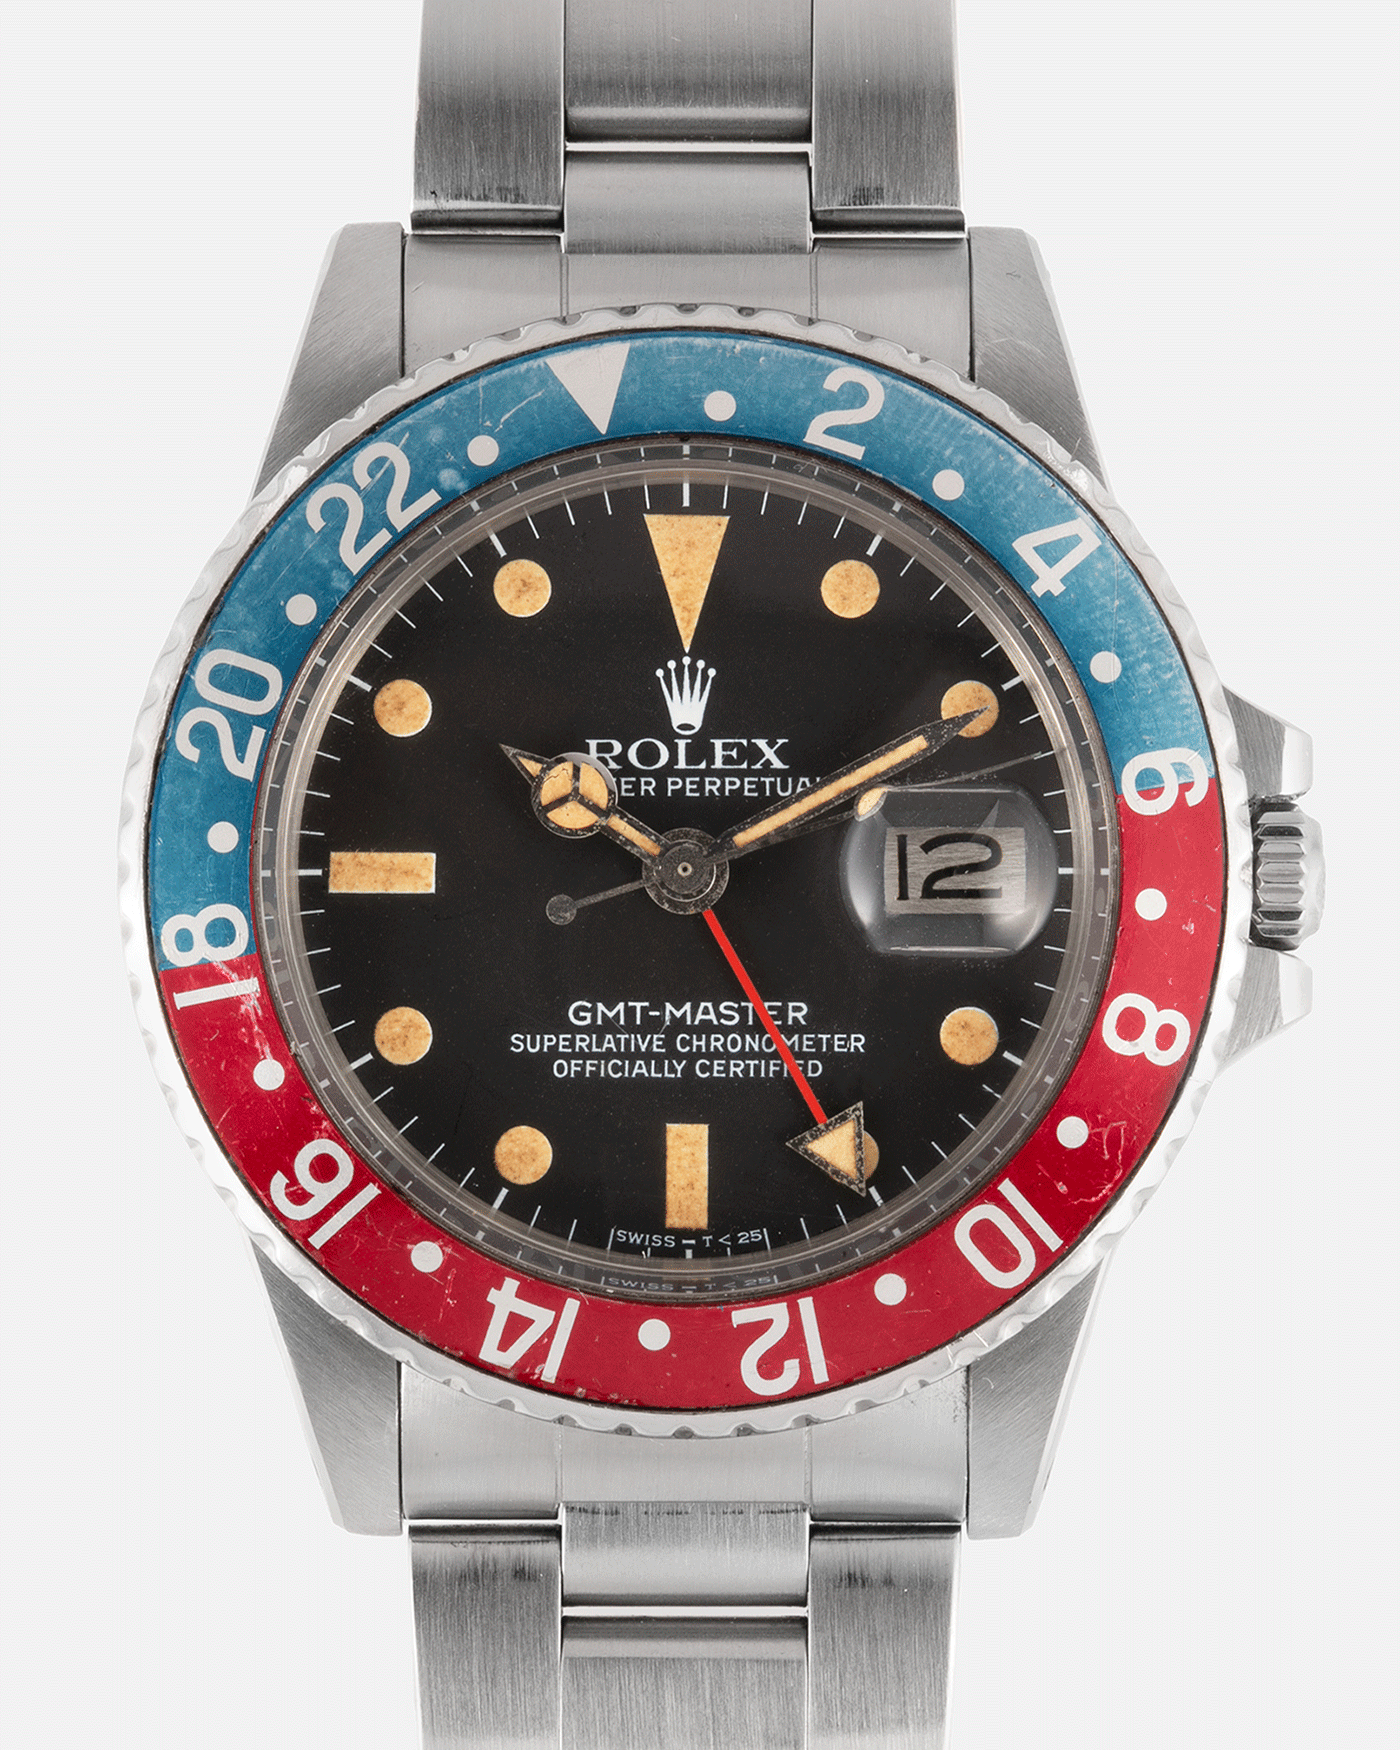 Brand: Rolex Year: 1977 Model: GMT-Master Reference Number: 1675 Serial Number: 519XXXX Material: Stainless Steel Movement: Cal. 1570 Case Diameter: 40mm Lug Width: 20mm Bracelet: Rolex 78360 Heavy Oyster Bracelet with 580 Endlinks and ‘A’ Stamp